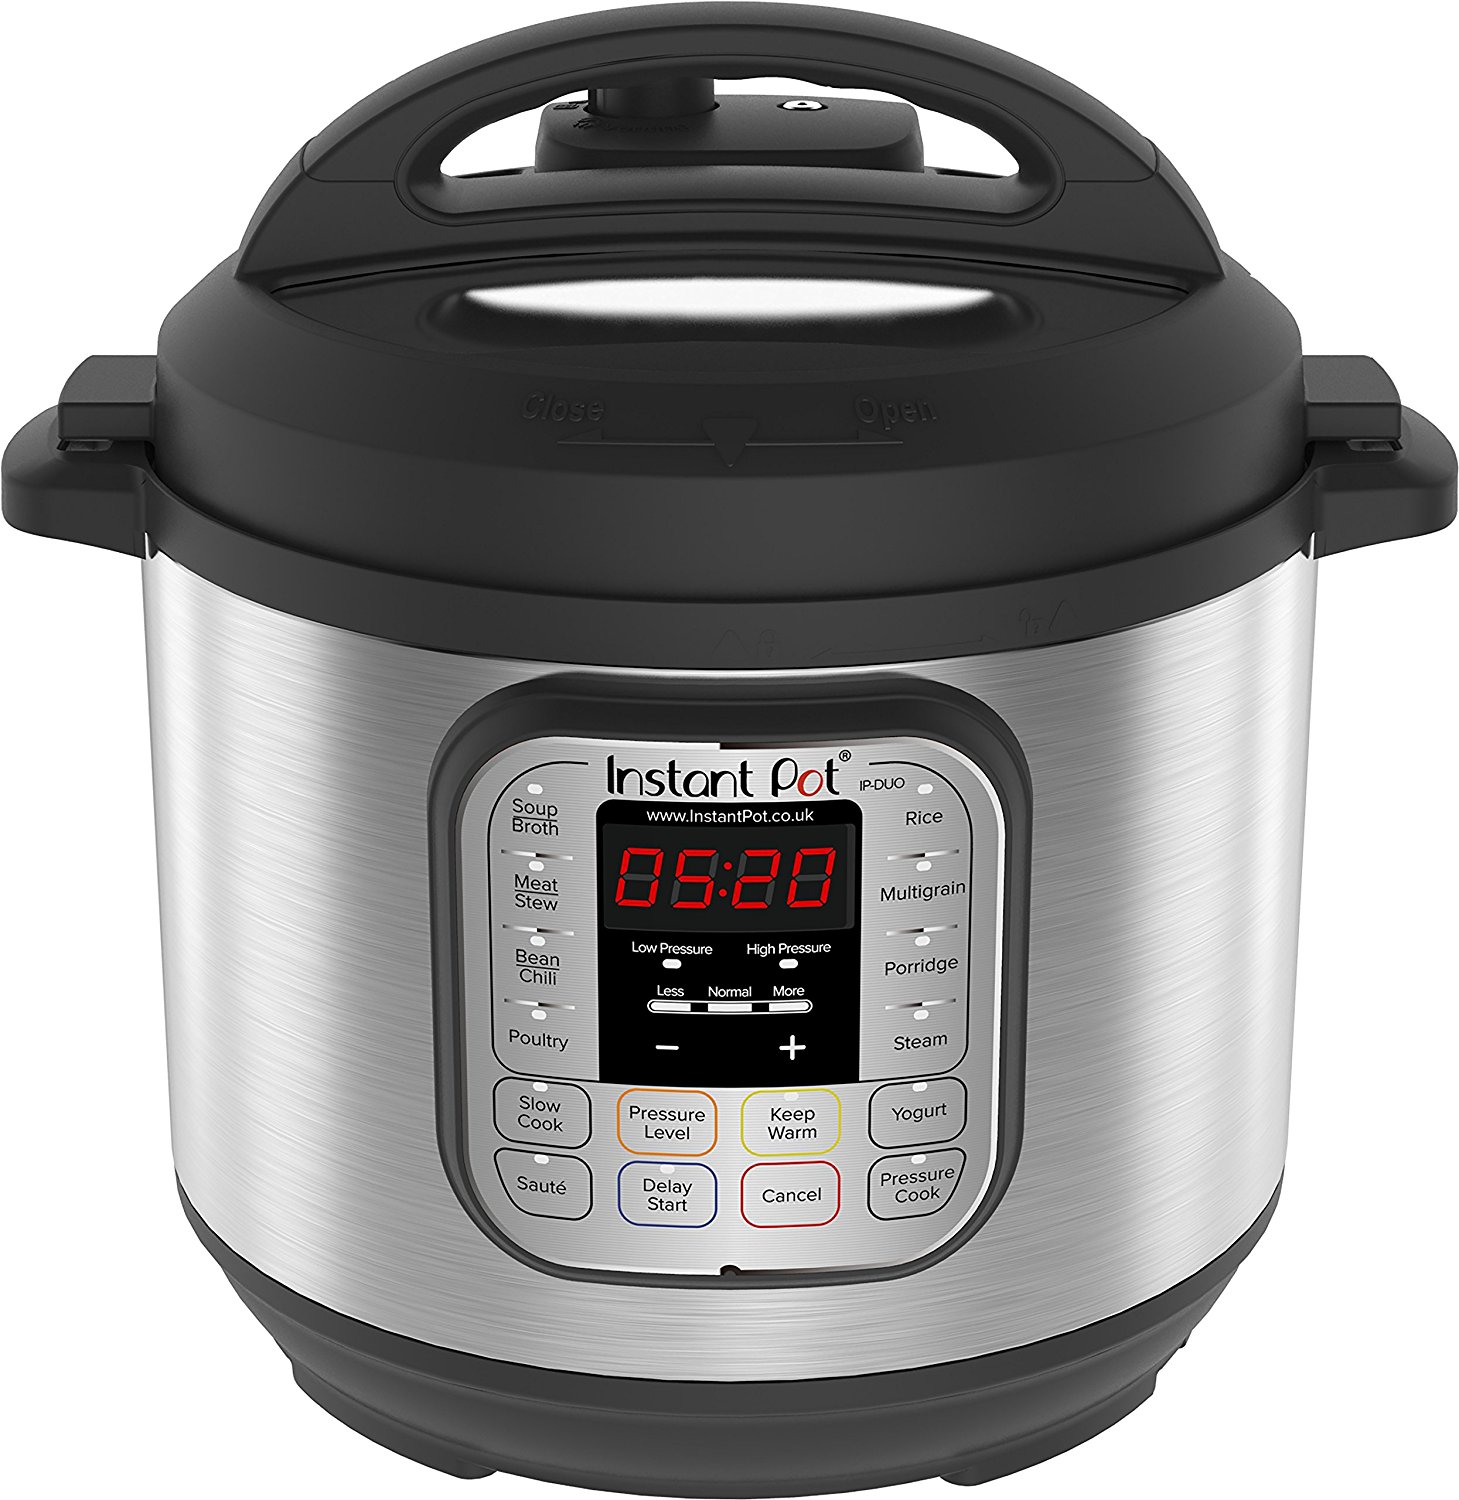 Picture of a Instant Pot Pressure Cooker